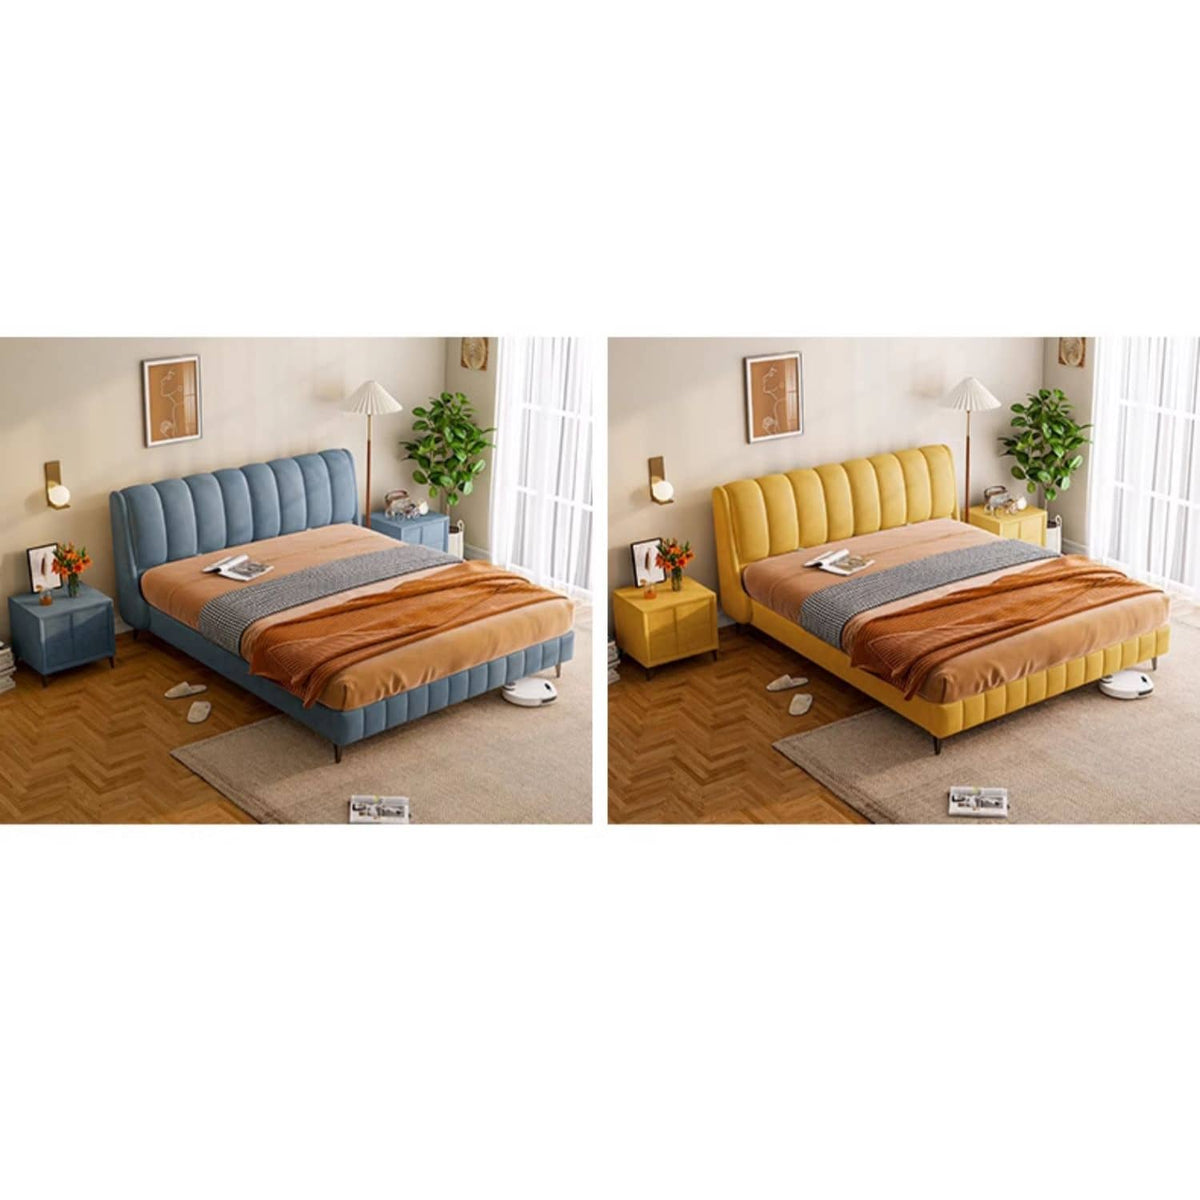 Solid Pine Wood Bed with Beige, Green, Blue, and Yellow Accents for a Stylish Bedroom hmzsh-1270